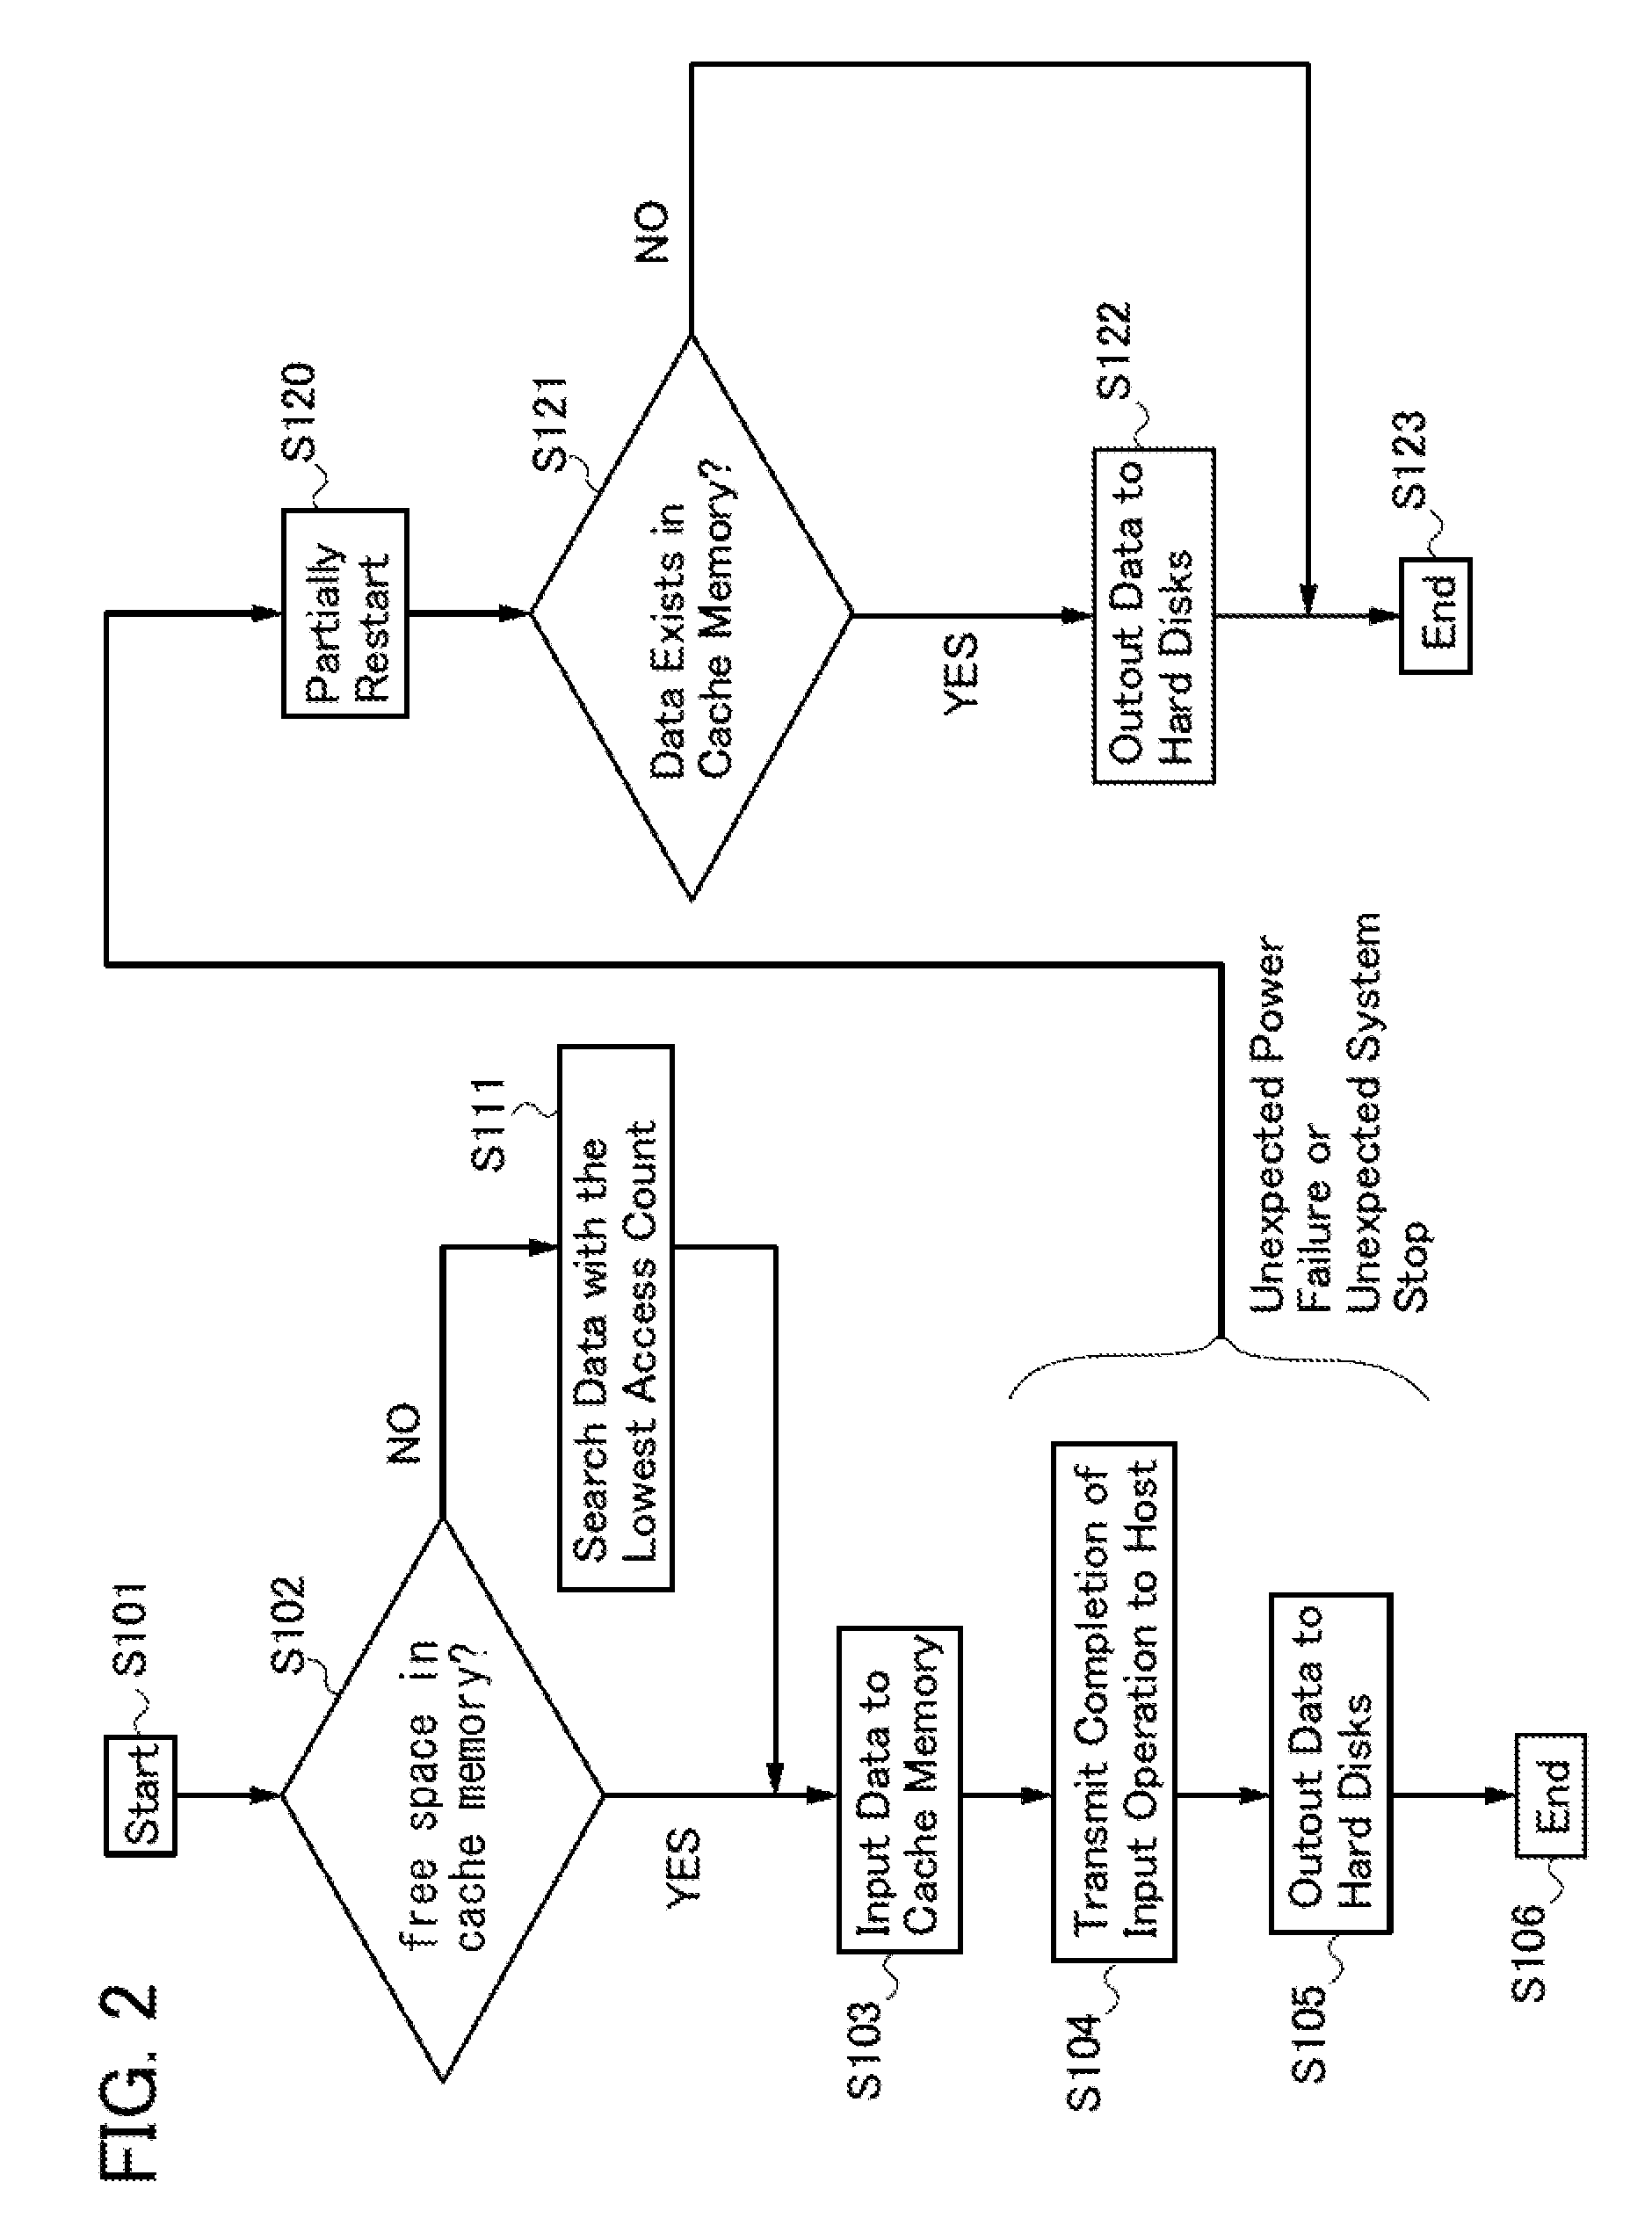 Array controller and storage system